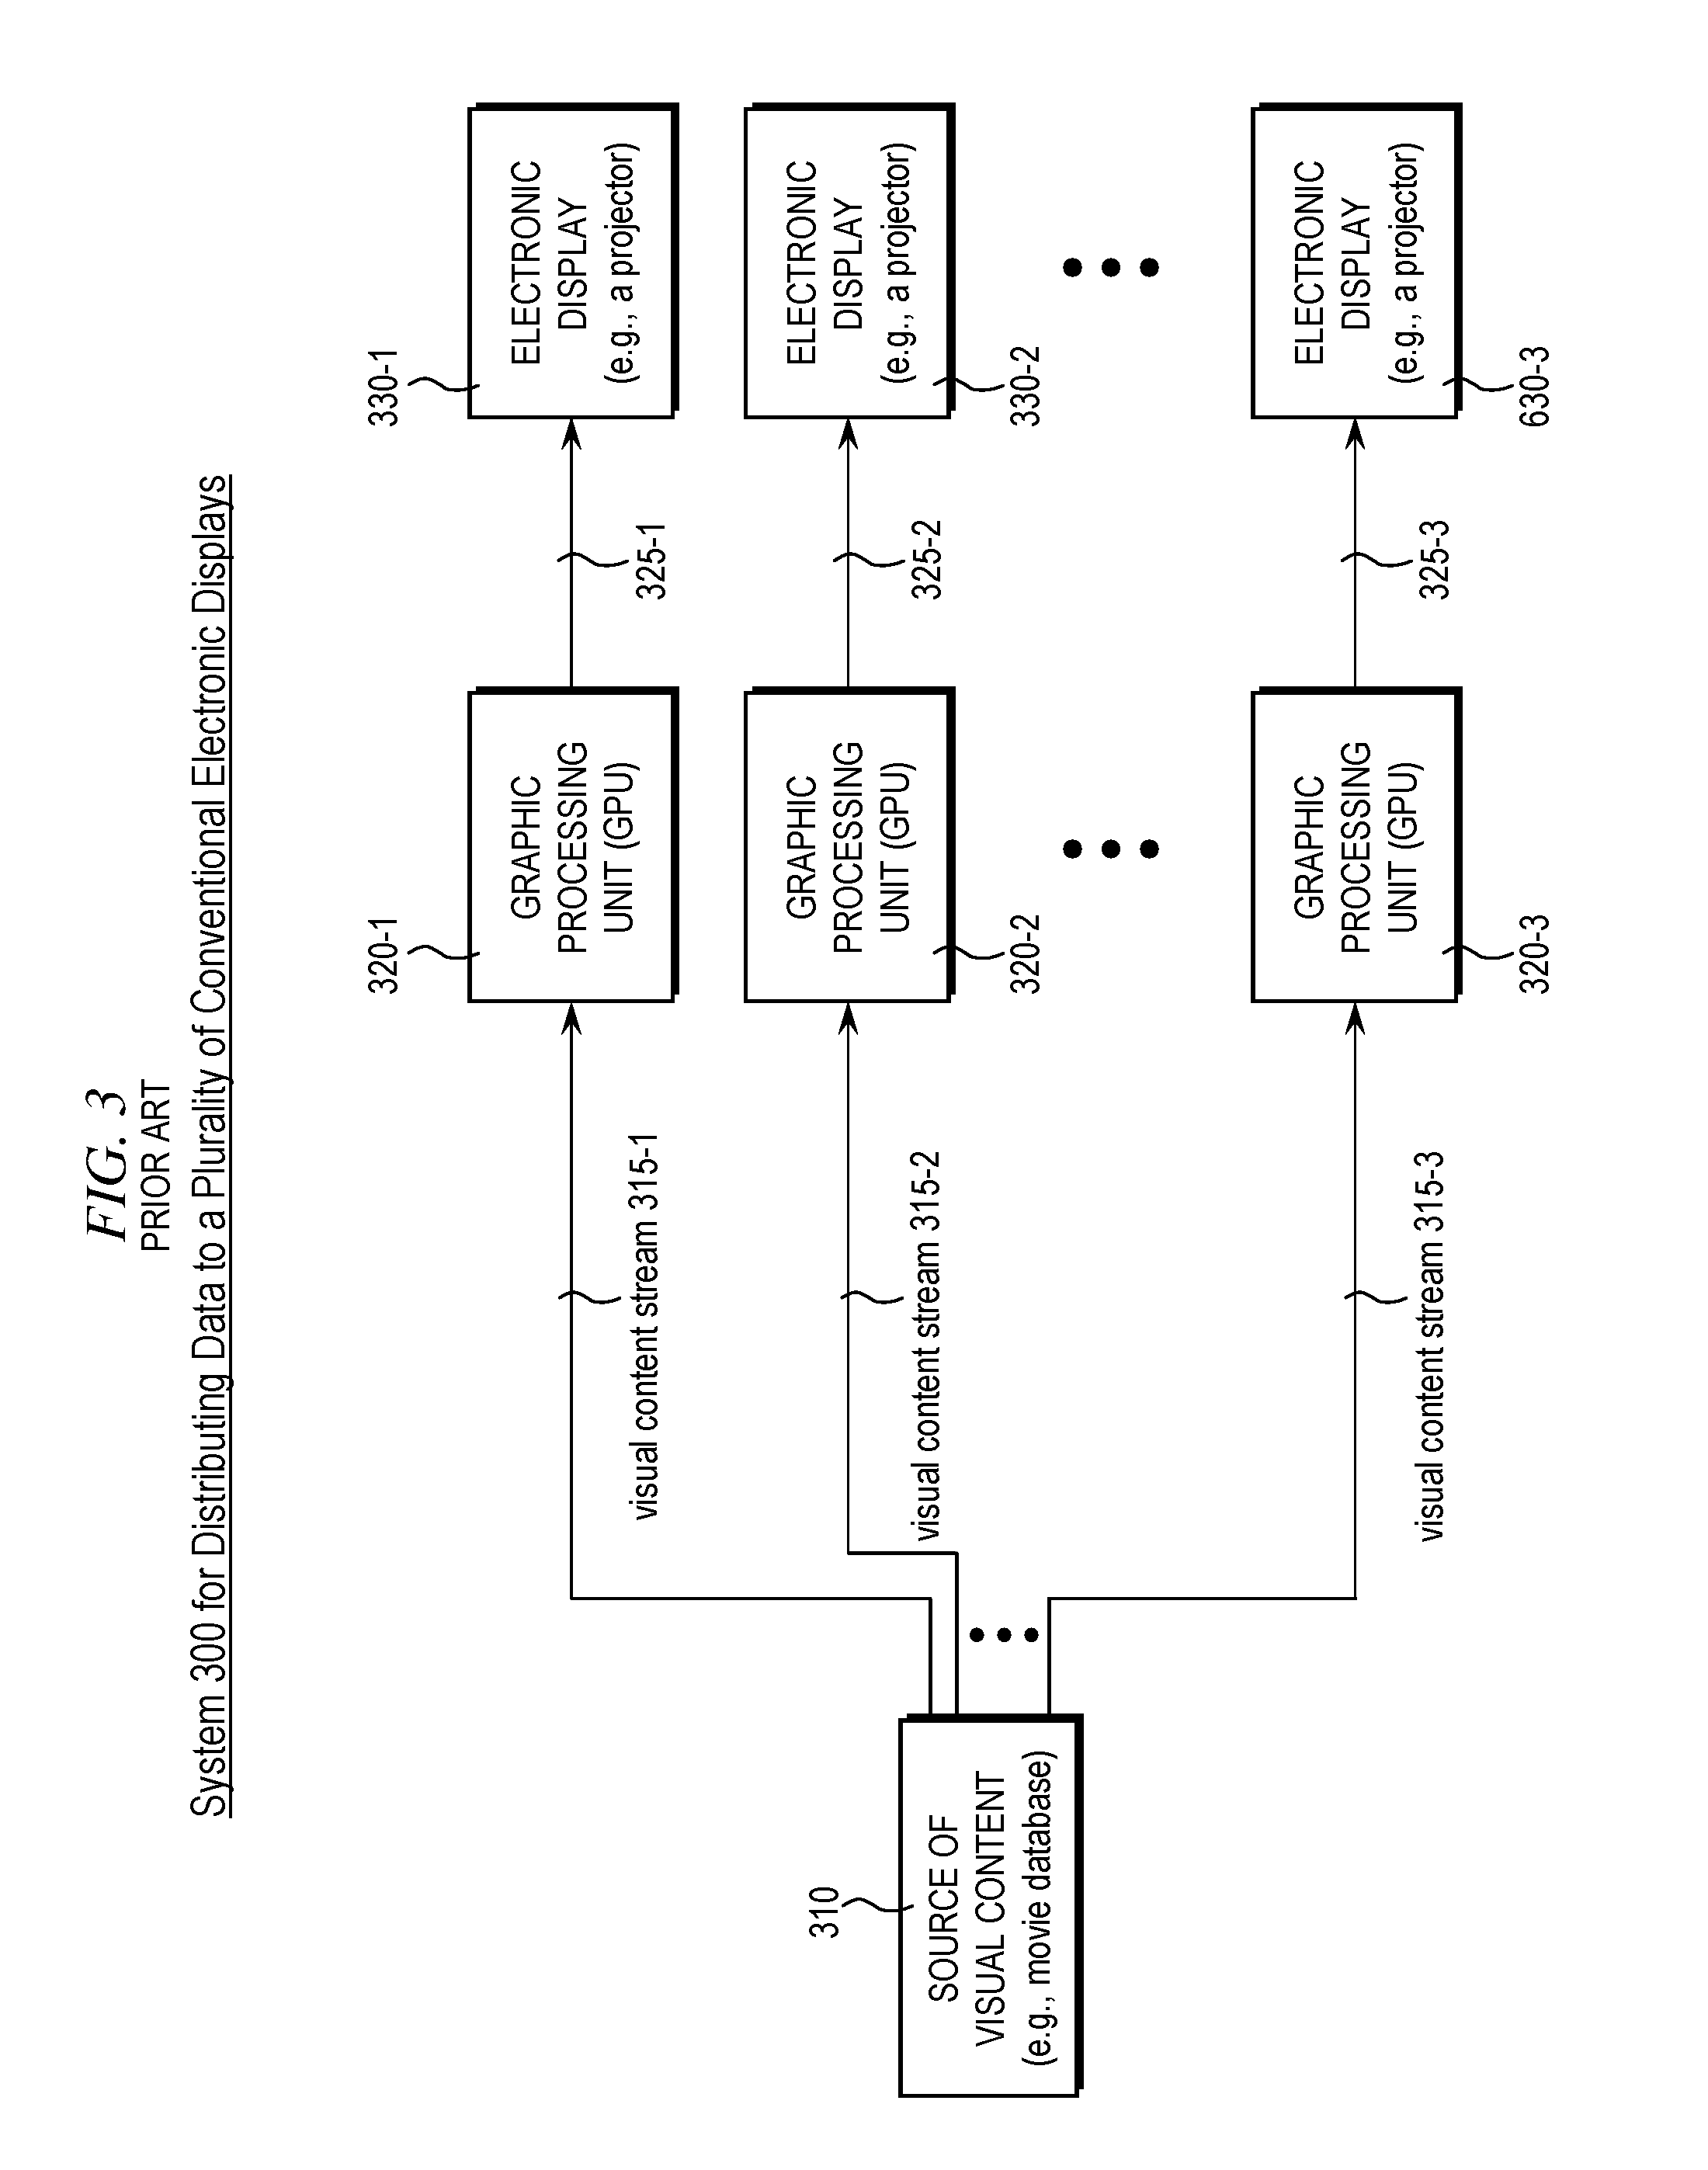 Computational Pipeline and Architecture for Multi-View Displays